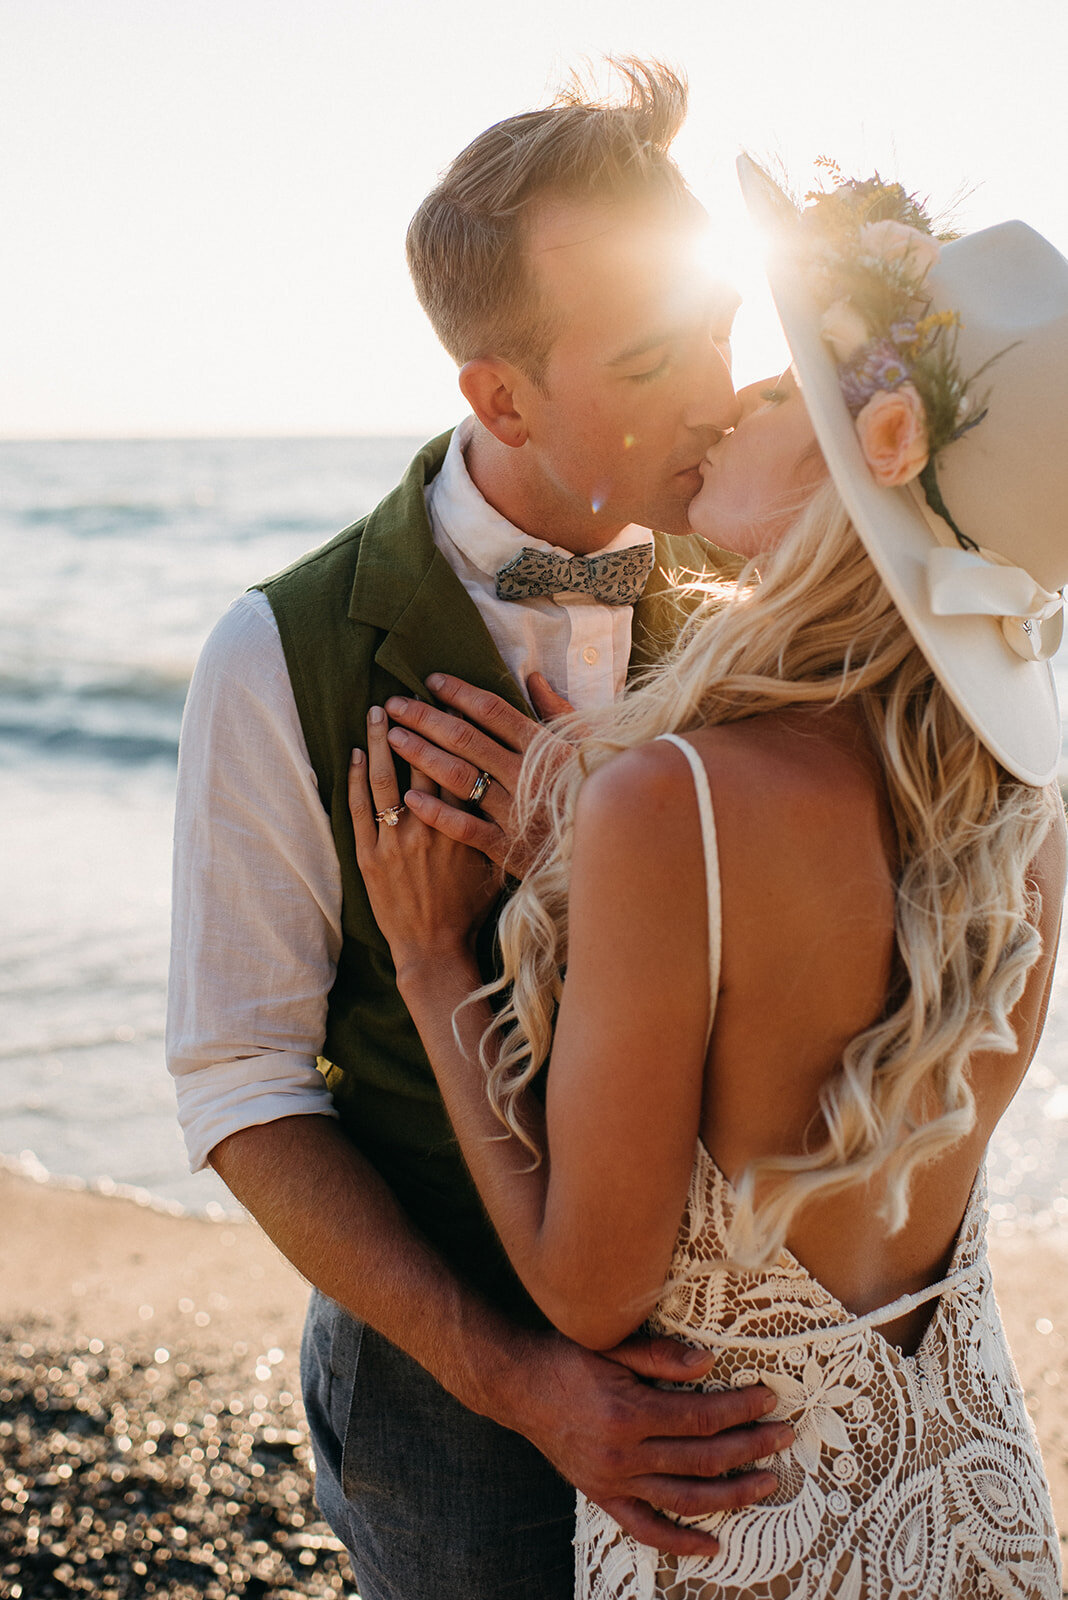 Bride and groom kissing on beach at sunset, captured by Kristin Sarah Photography. Featured on the Bronte Bride Vendor Guide.